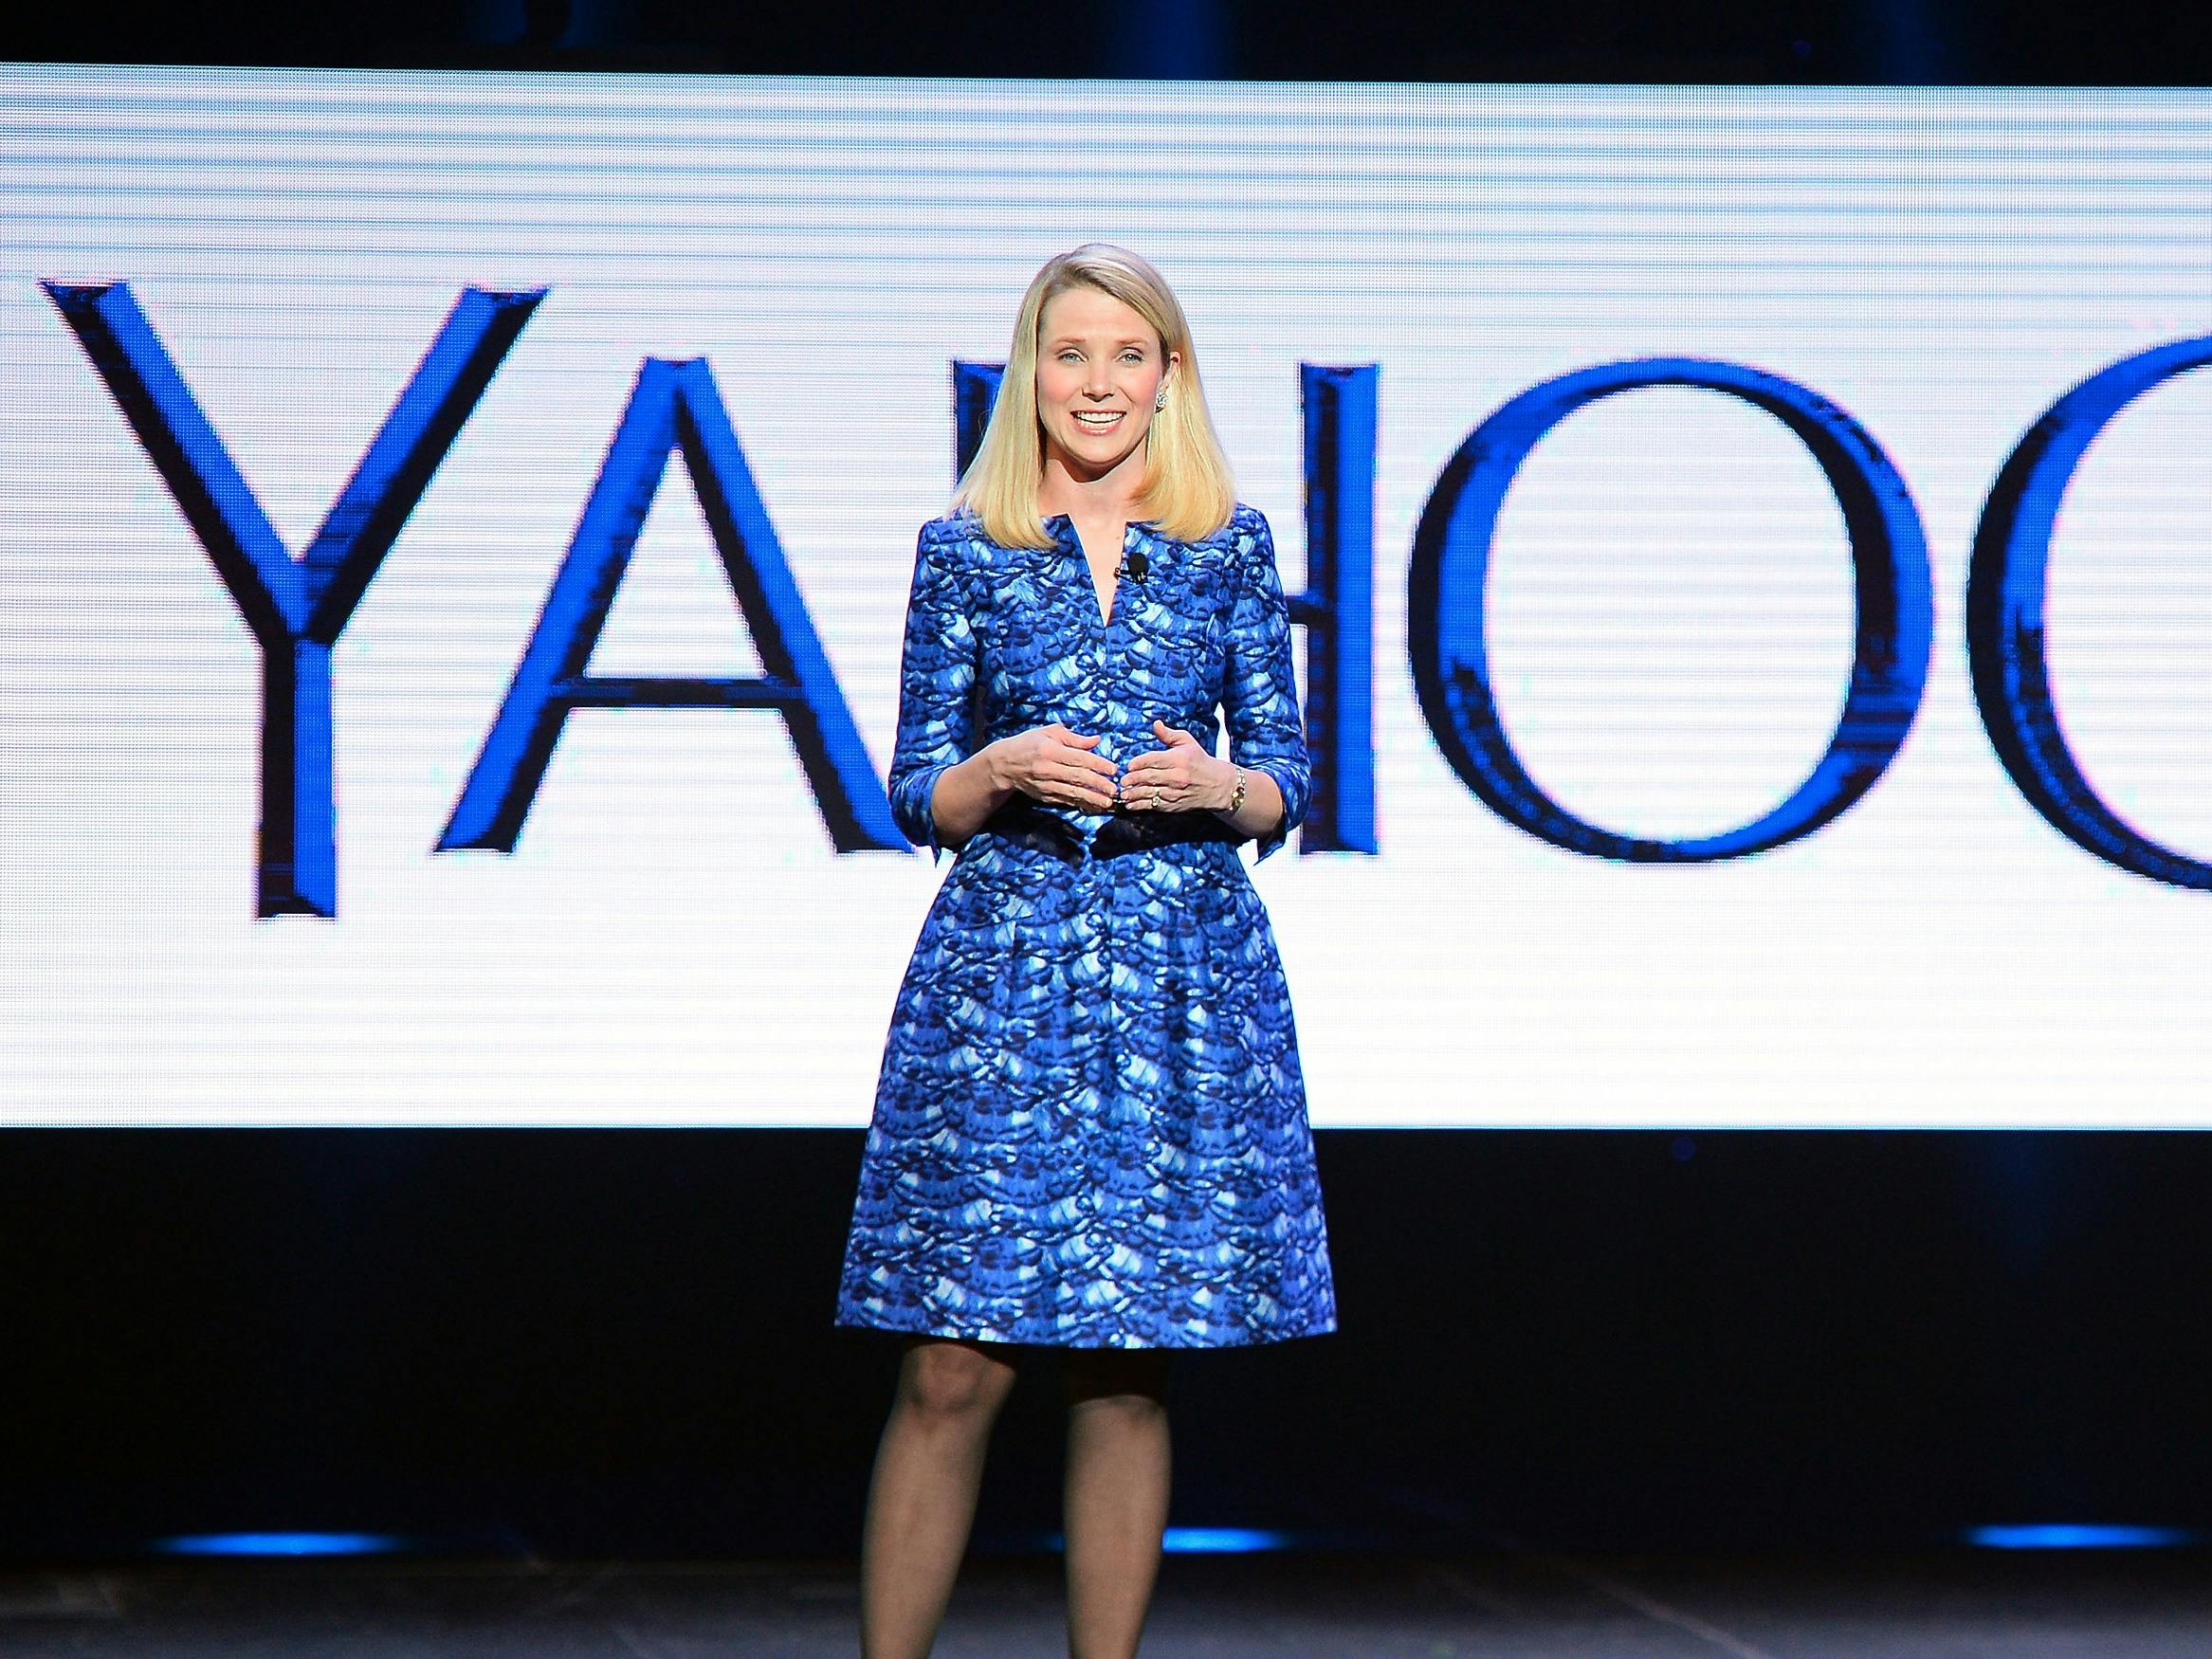 Yahoo CEO reprimanded in fallout from data breach